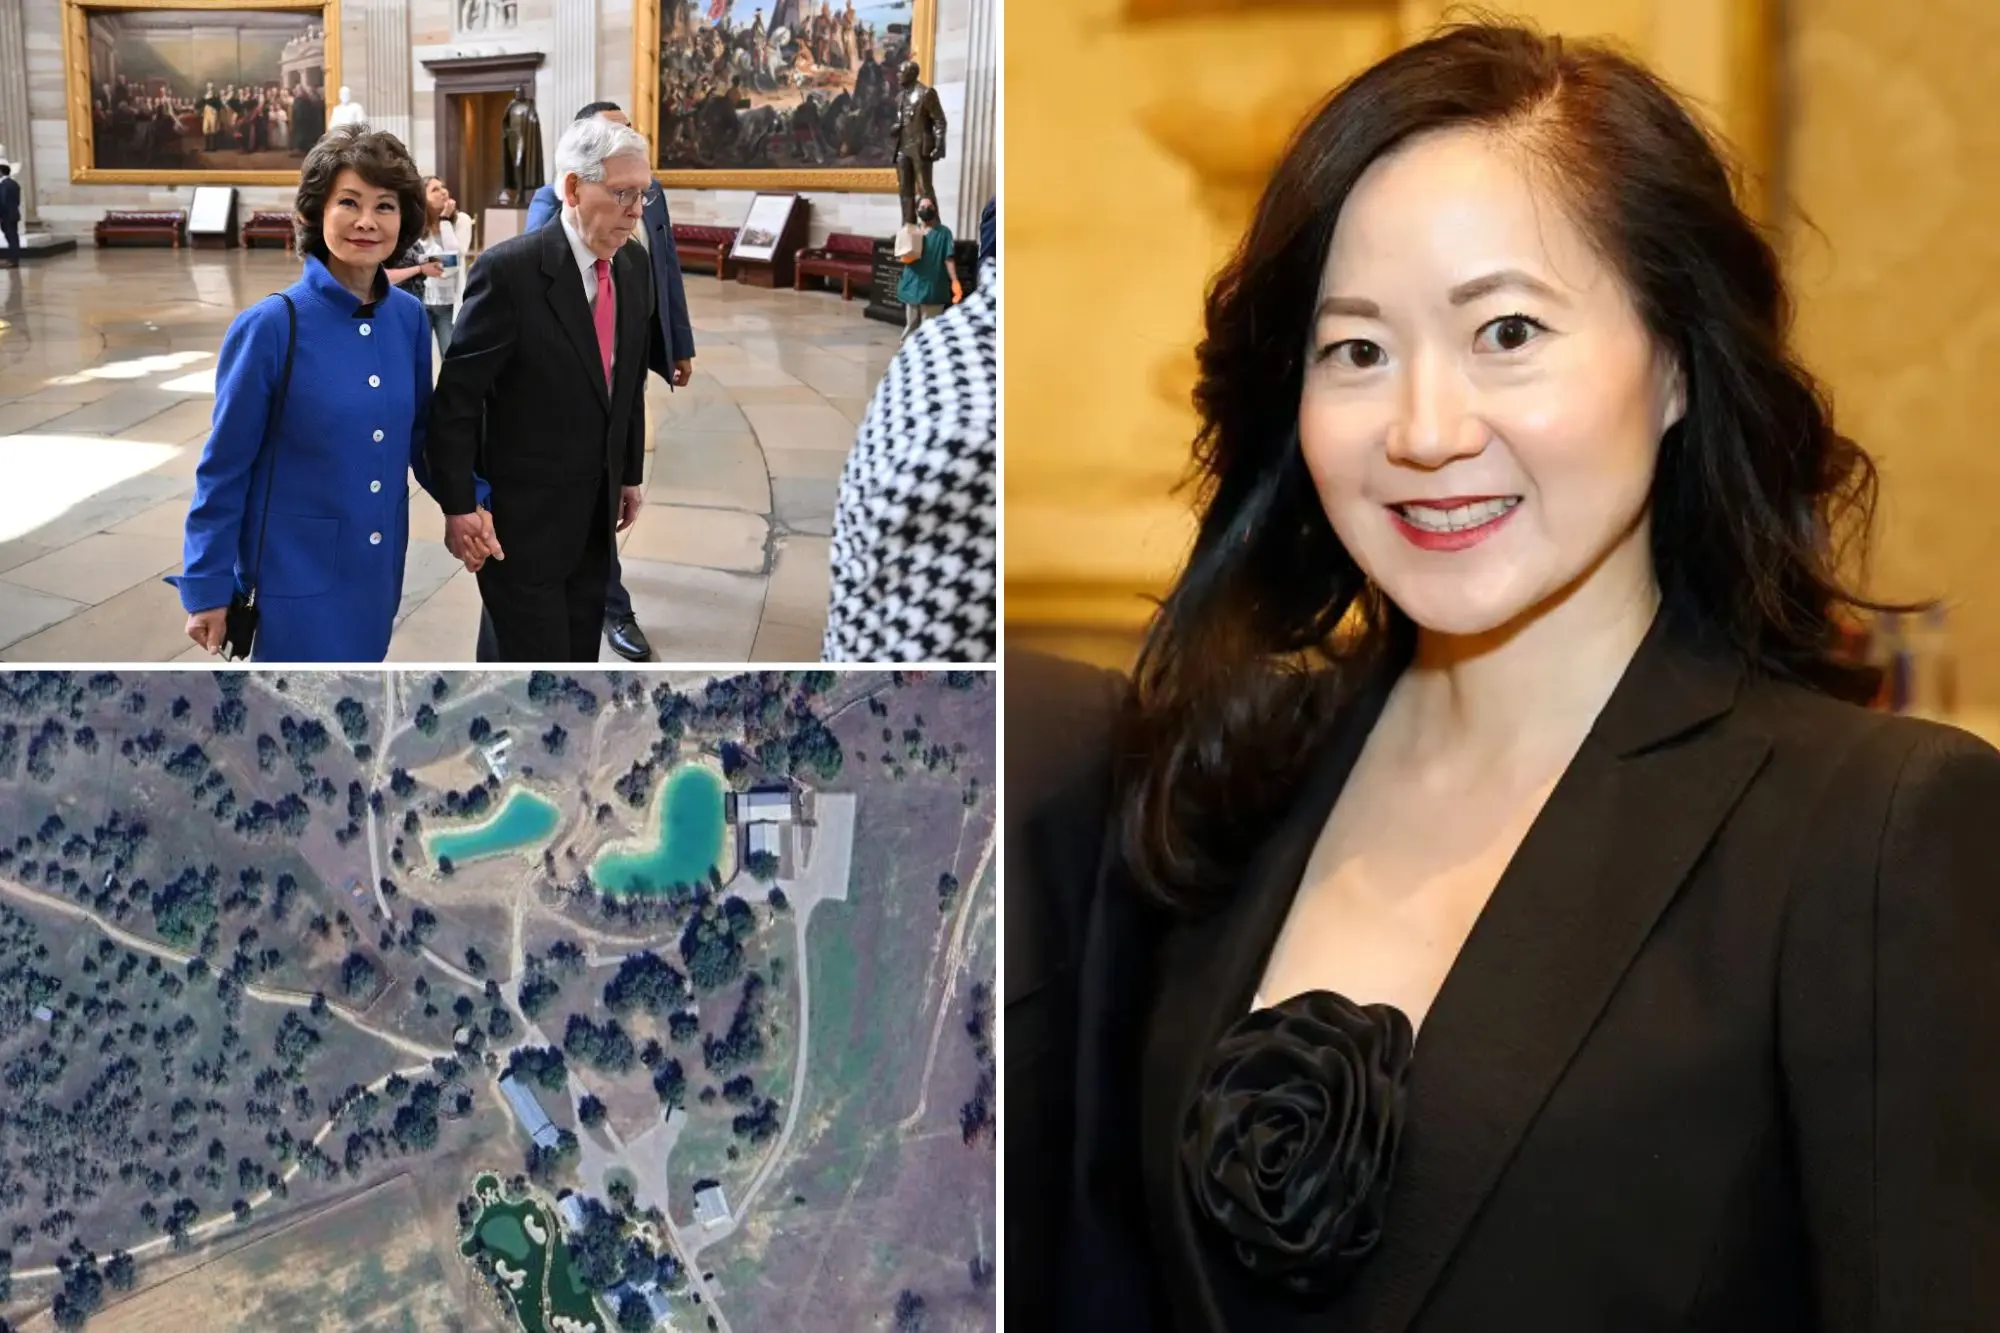 Tragedy Strikes Texas: CEO Angela Chao's Fatal Crash After a Fun Night With Friends